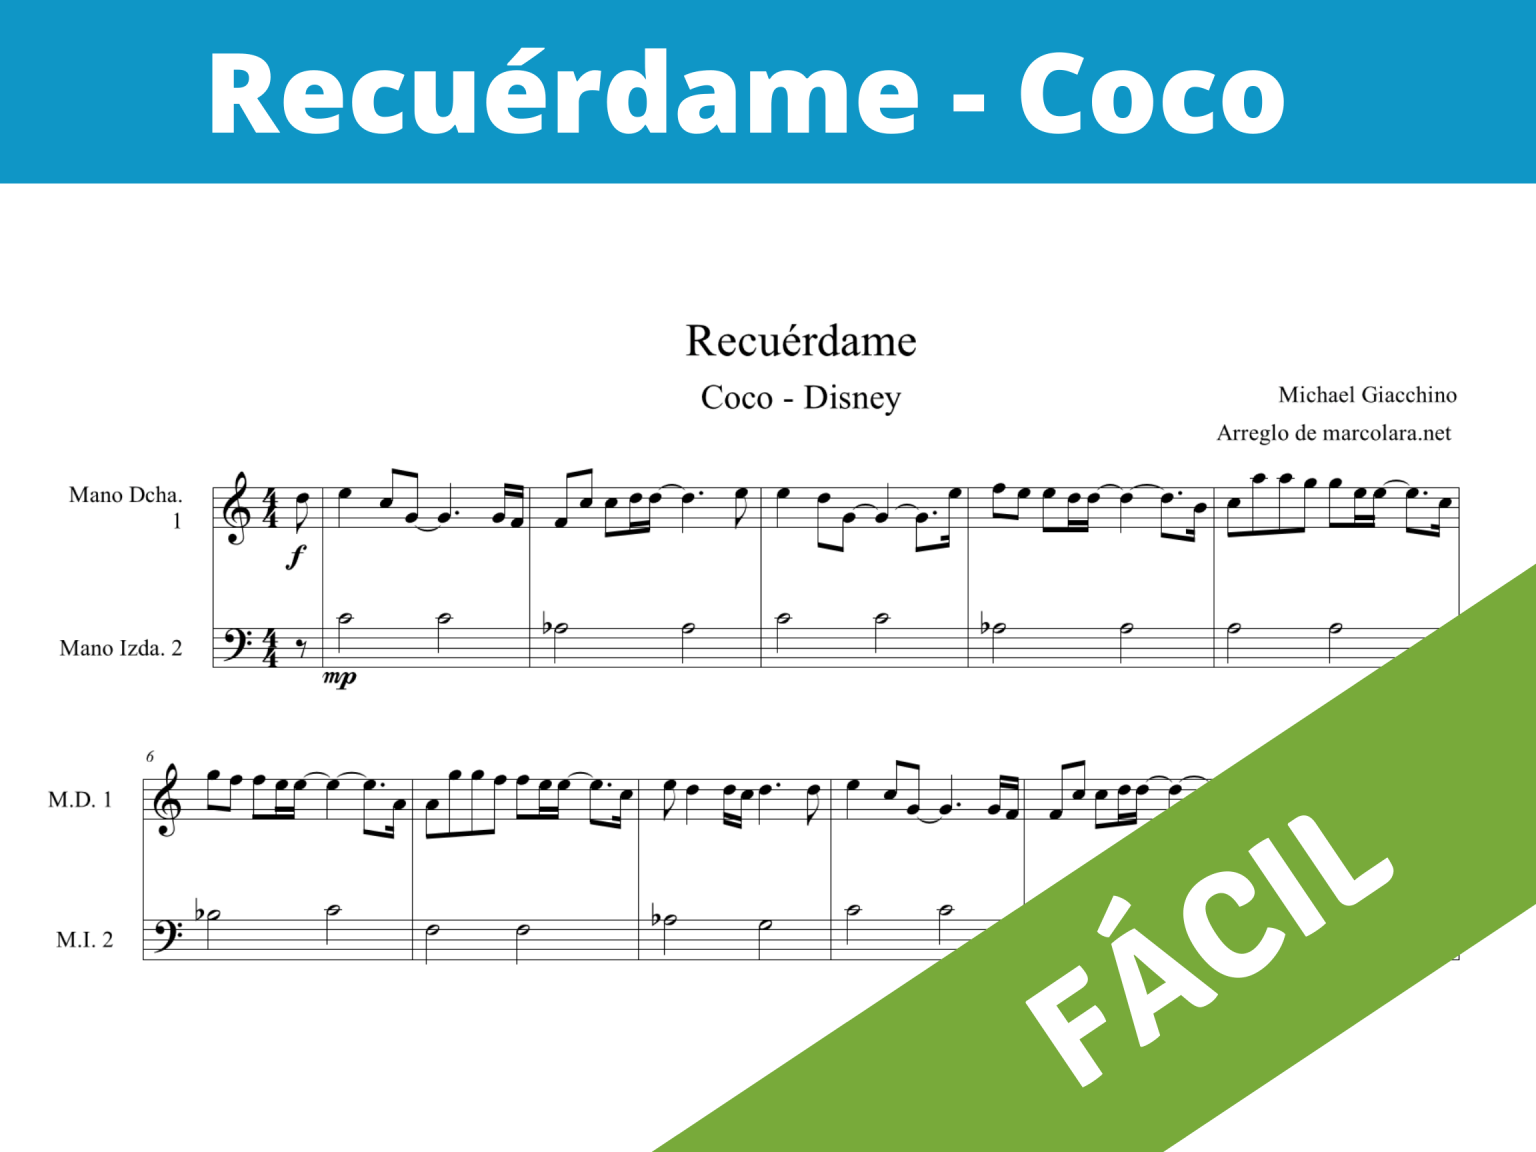 remember me coco piano notes